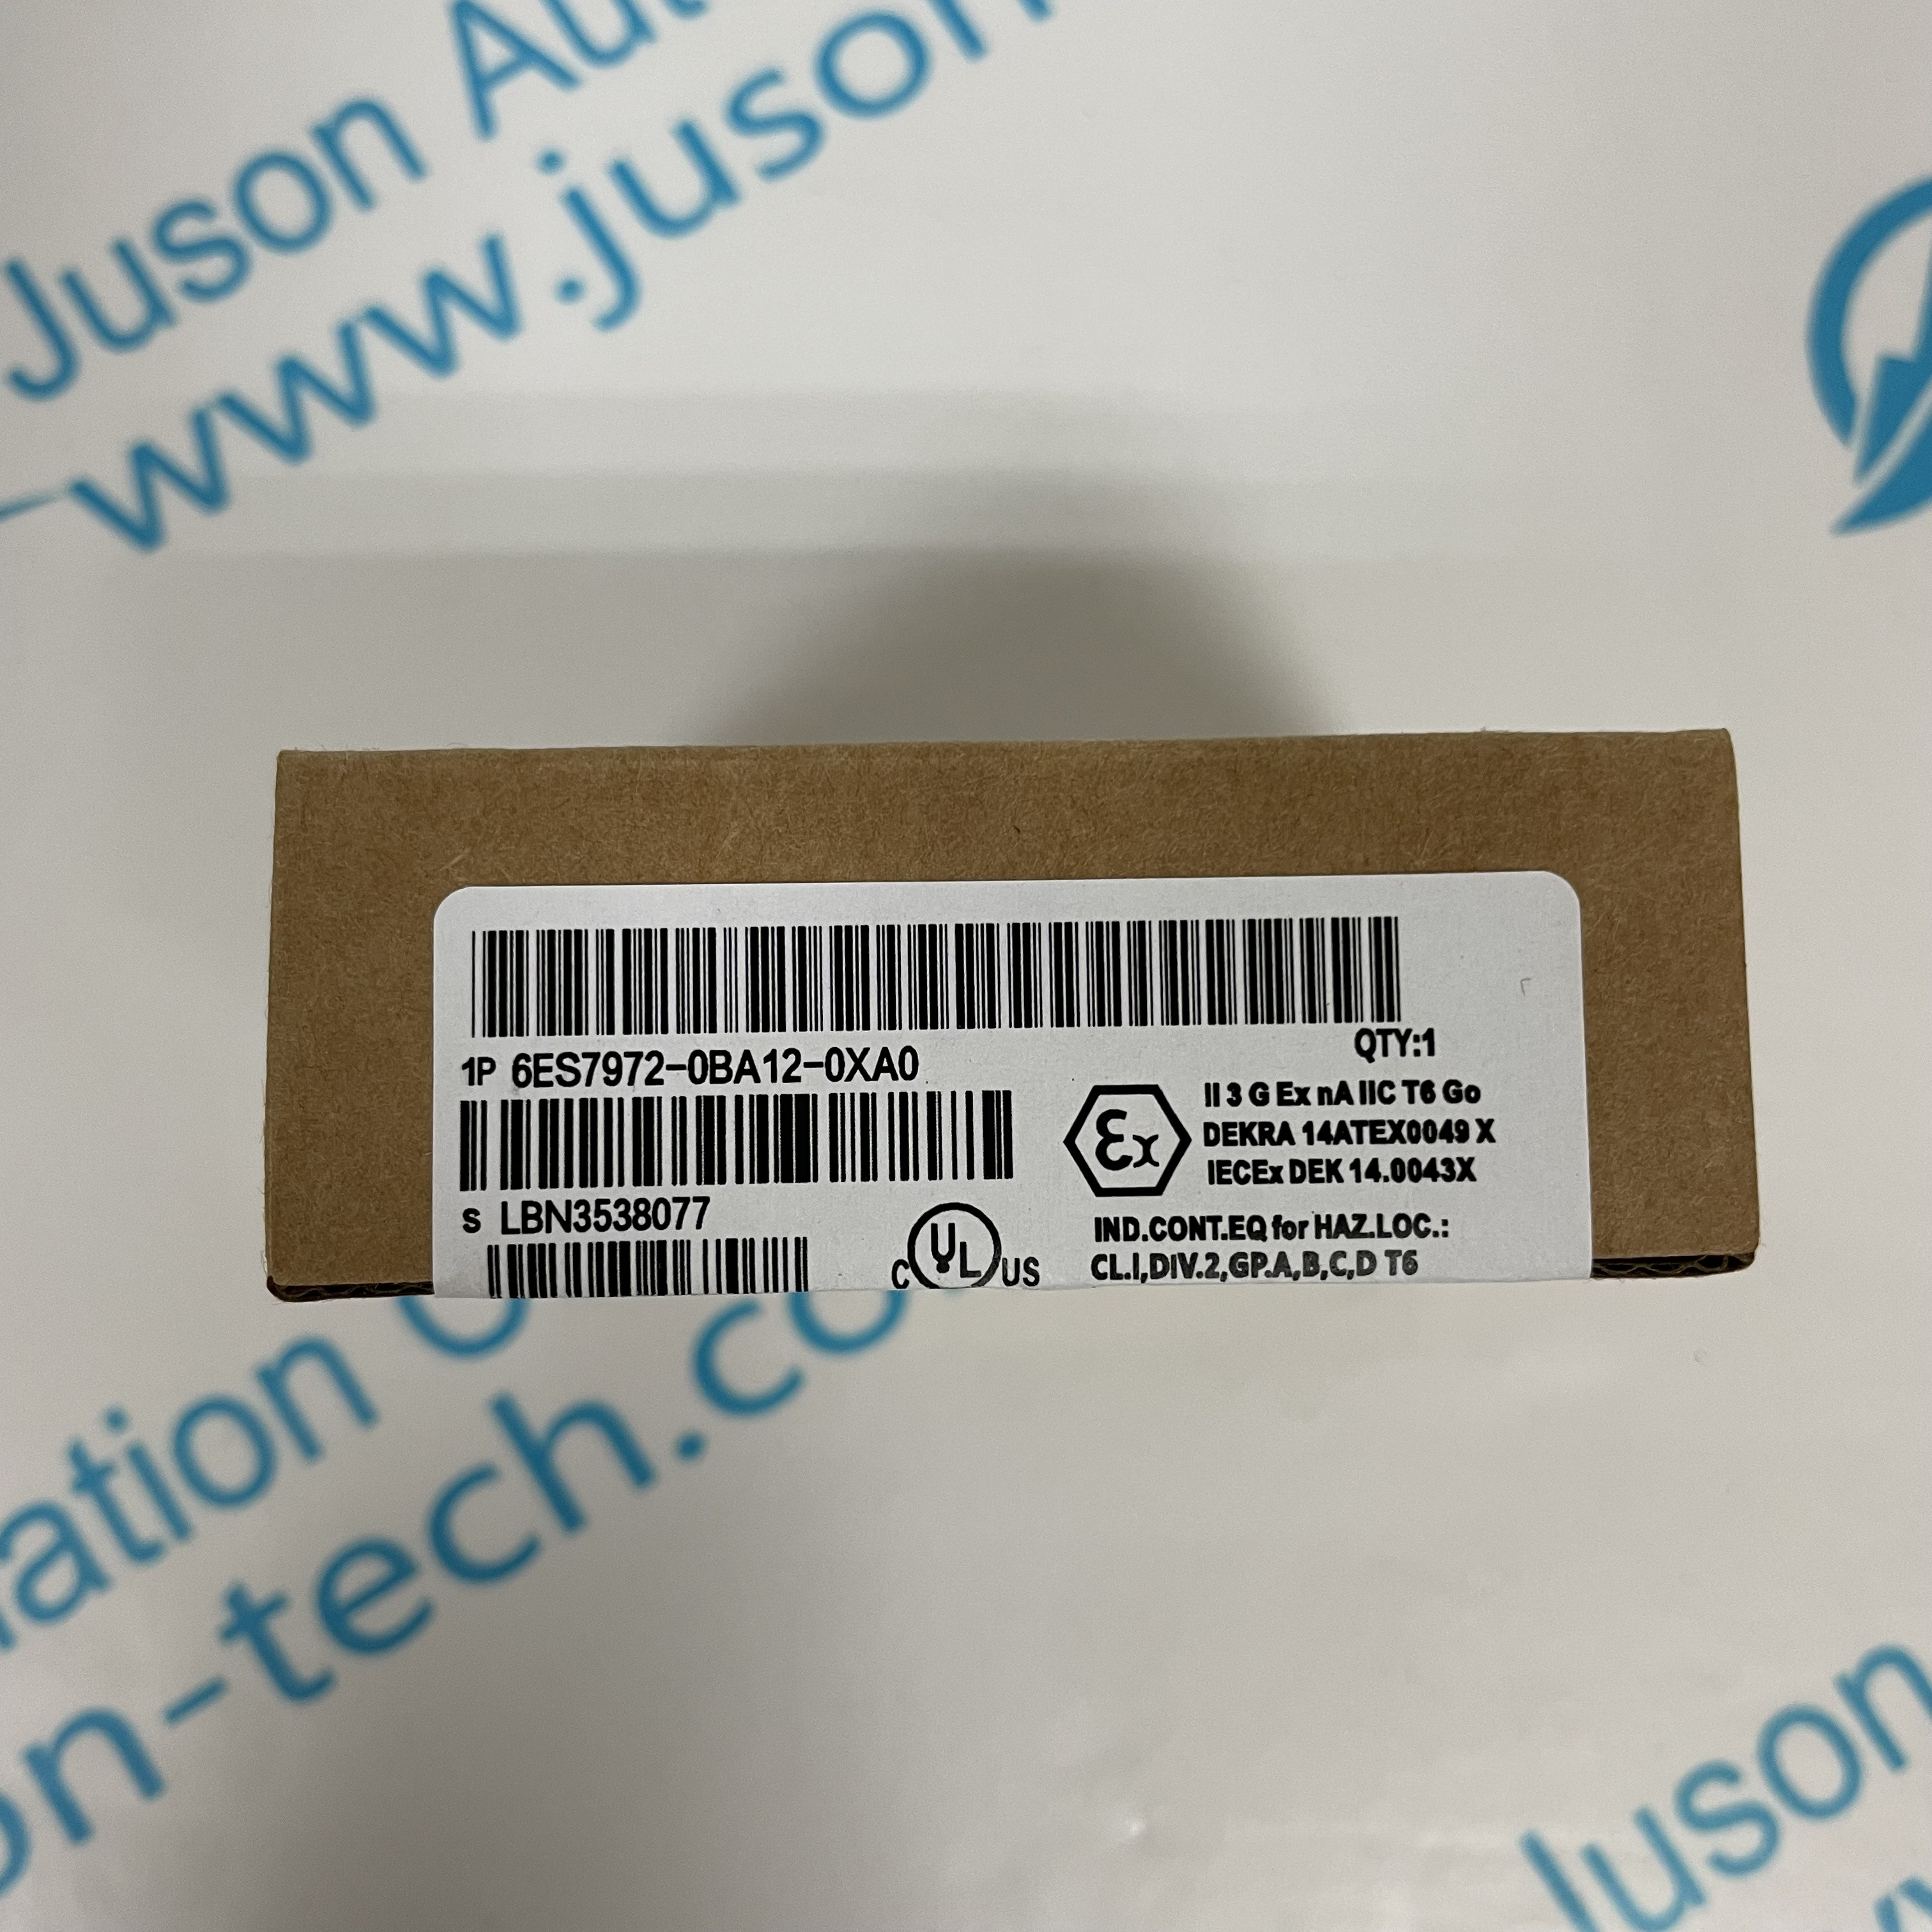 SIEMENS bus connector 6ES7972-0BA12-0XA0 SIMATIC DP, Connection plug for PROFIBUS up to 12 Mbit/s 90° cable outlet, 15.8x 64x 35.6 mm (WxHxD)